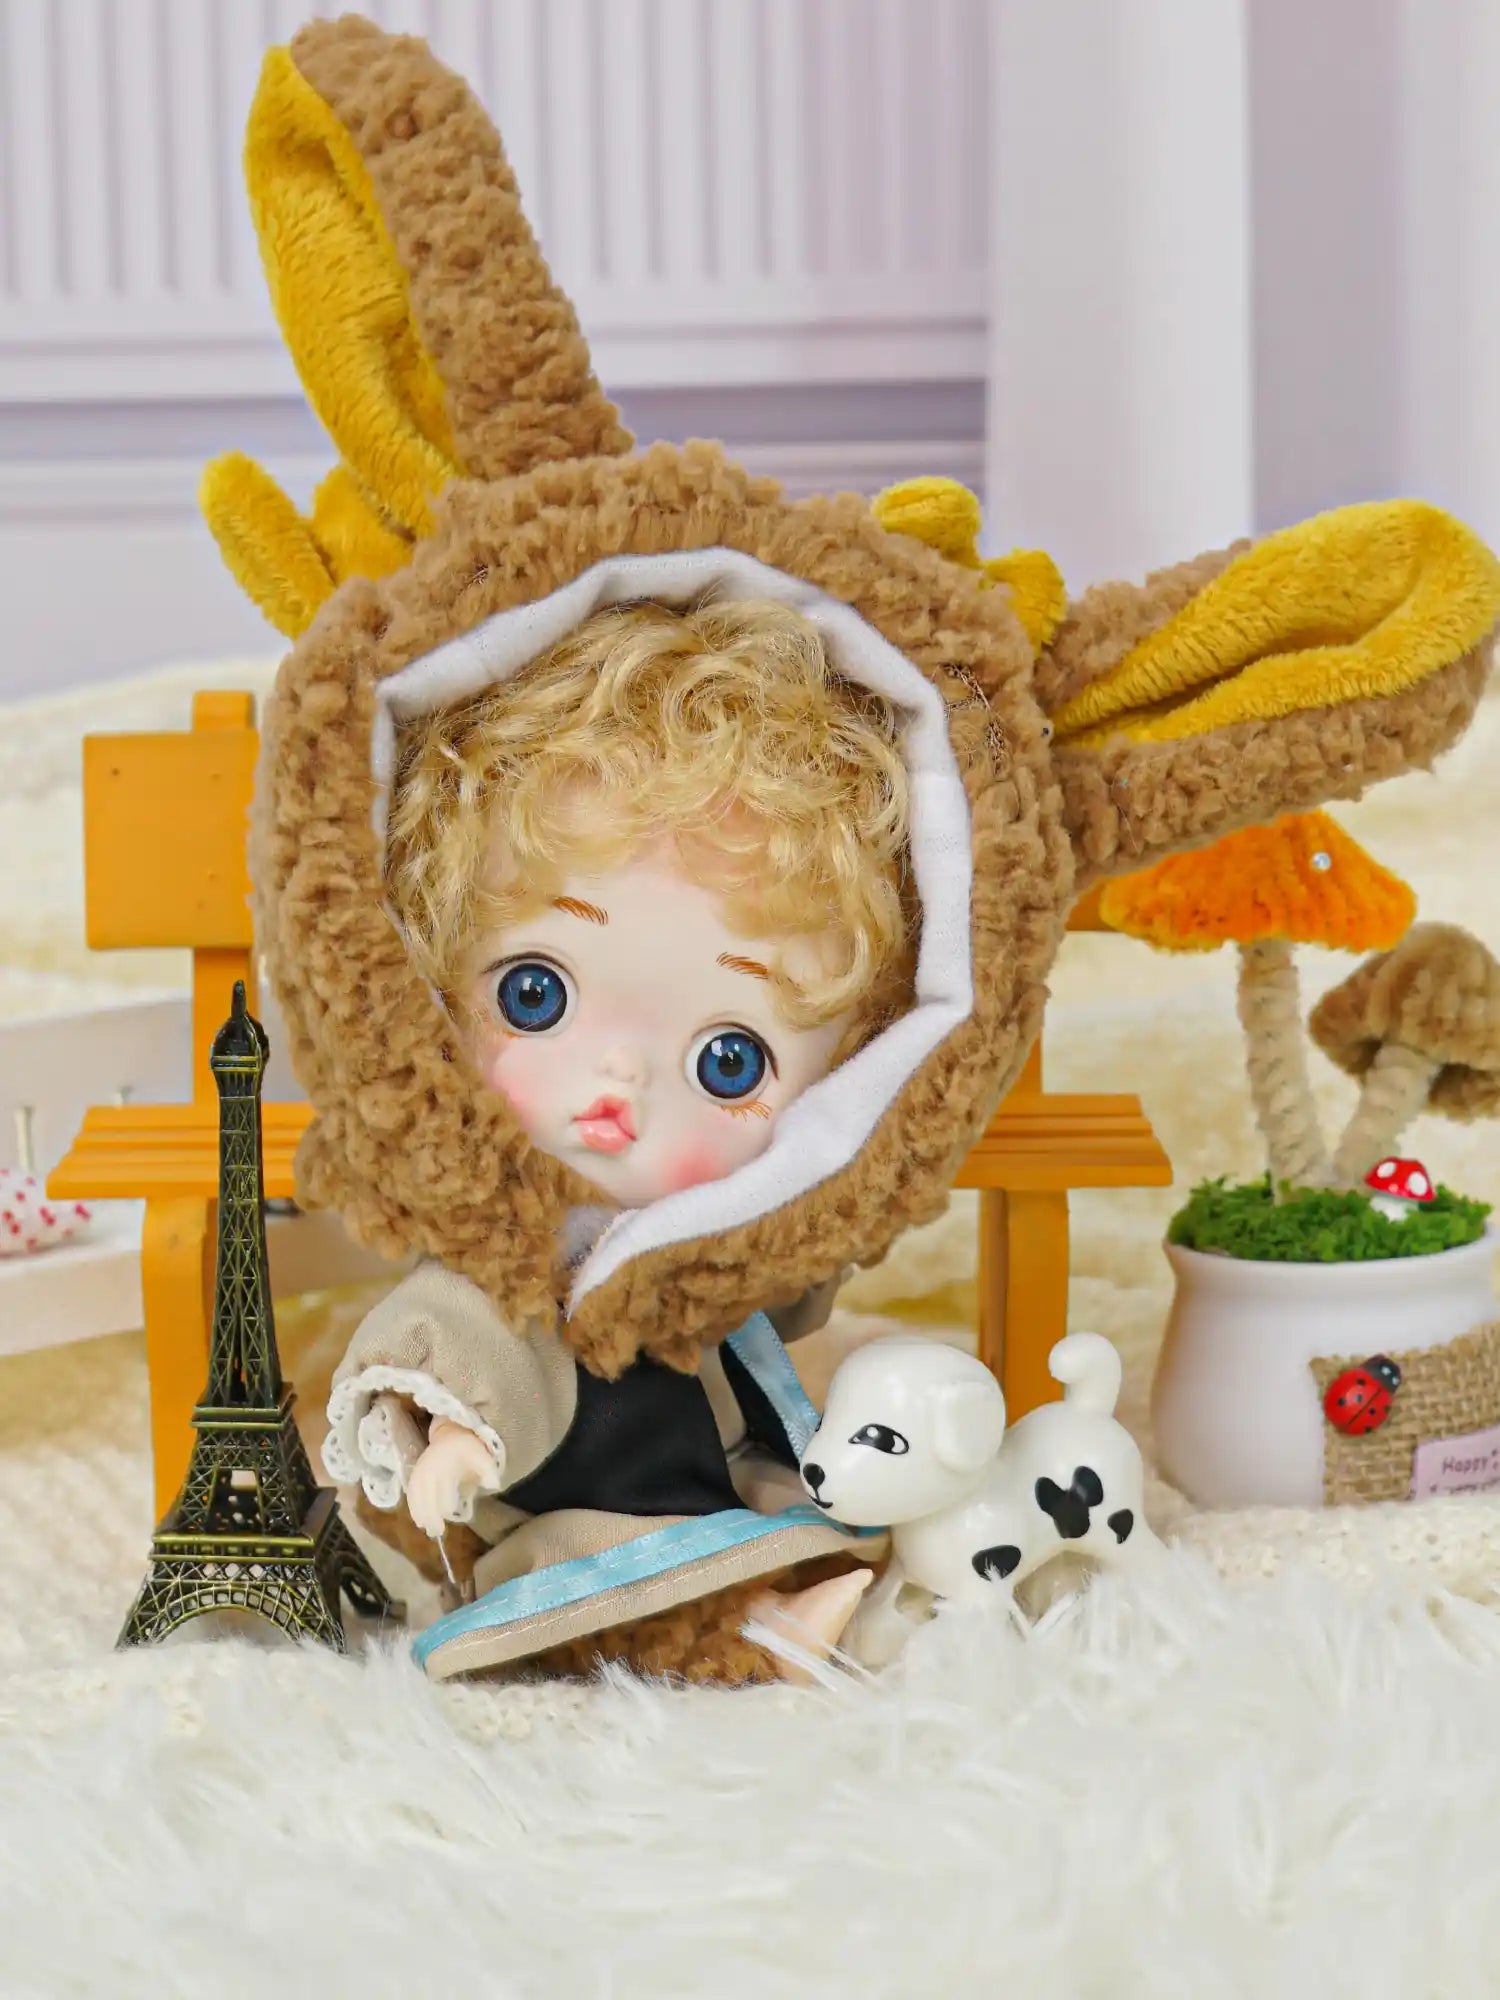 Charming curly-haired doll wearing a bunny costume, seated next to miniature Parisian and animal decorations.